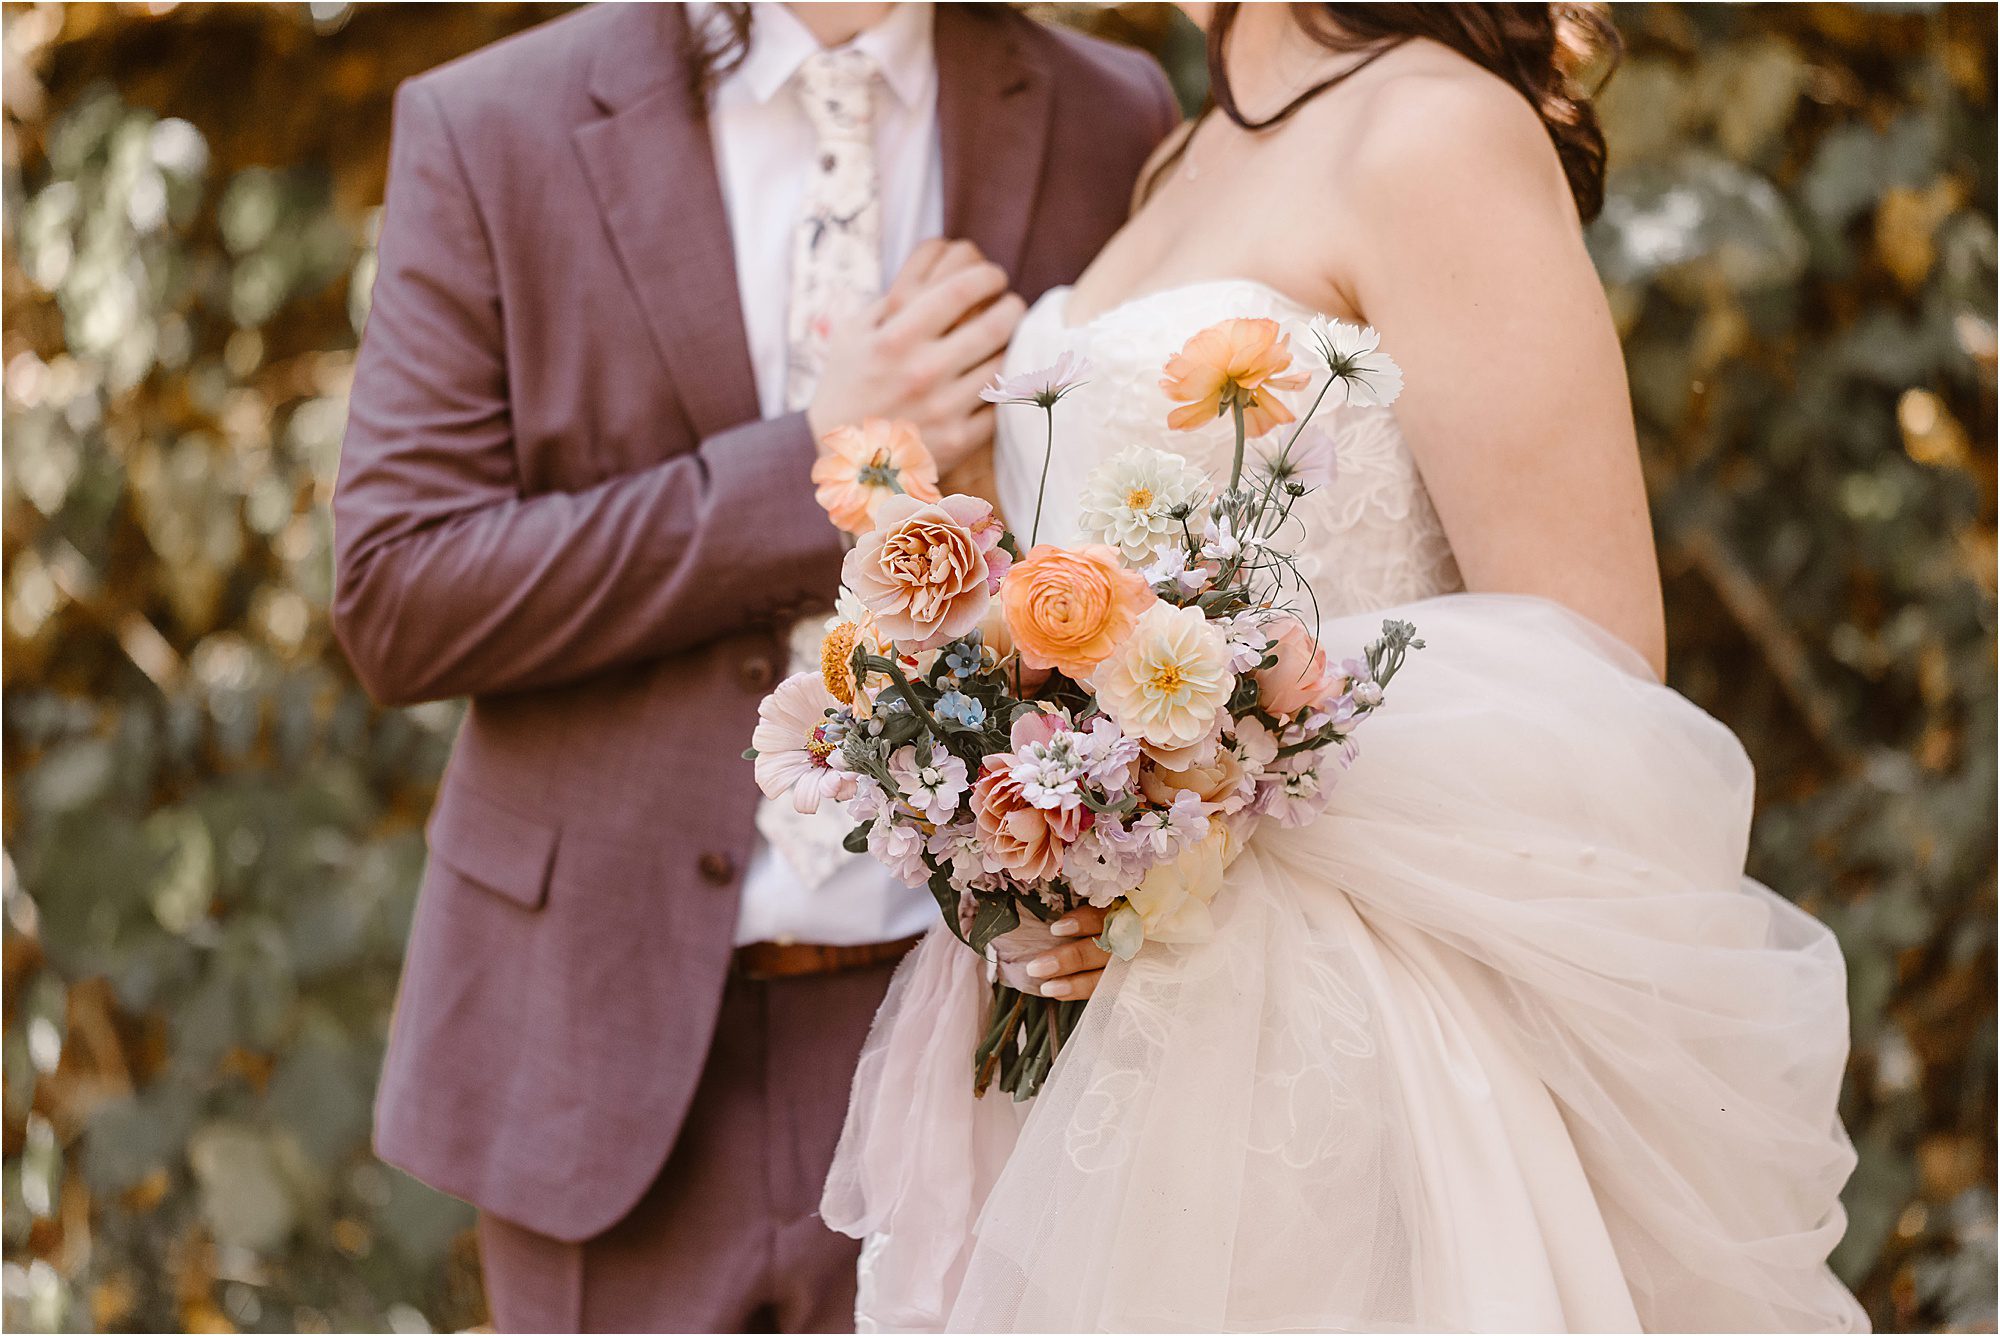 bride and groom hold fall wedding bouquet against strapless wedding dress and burgundy suit with floral tie